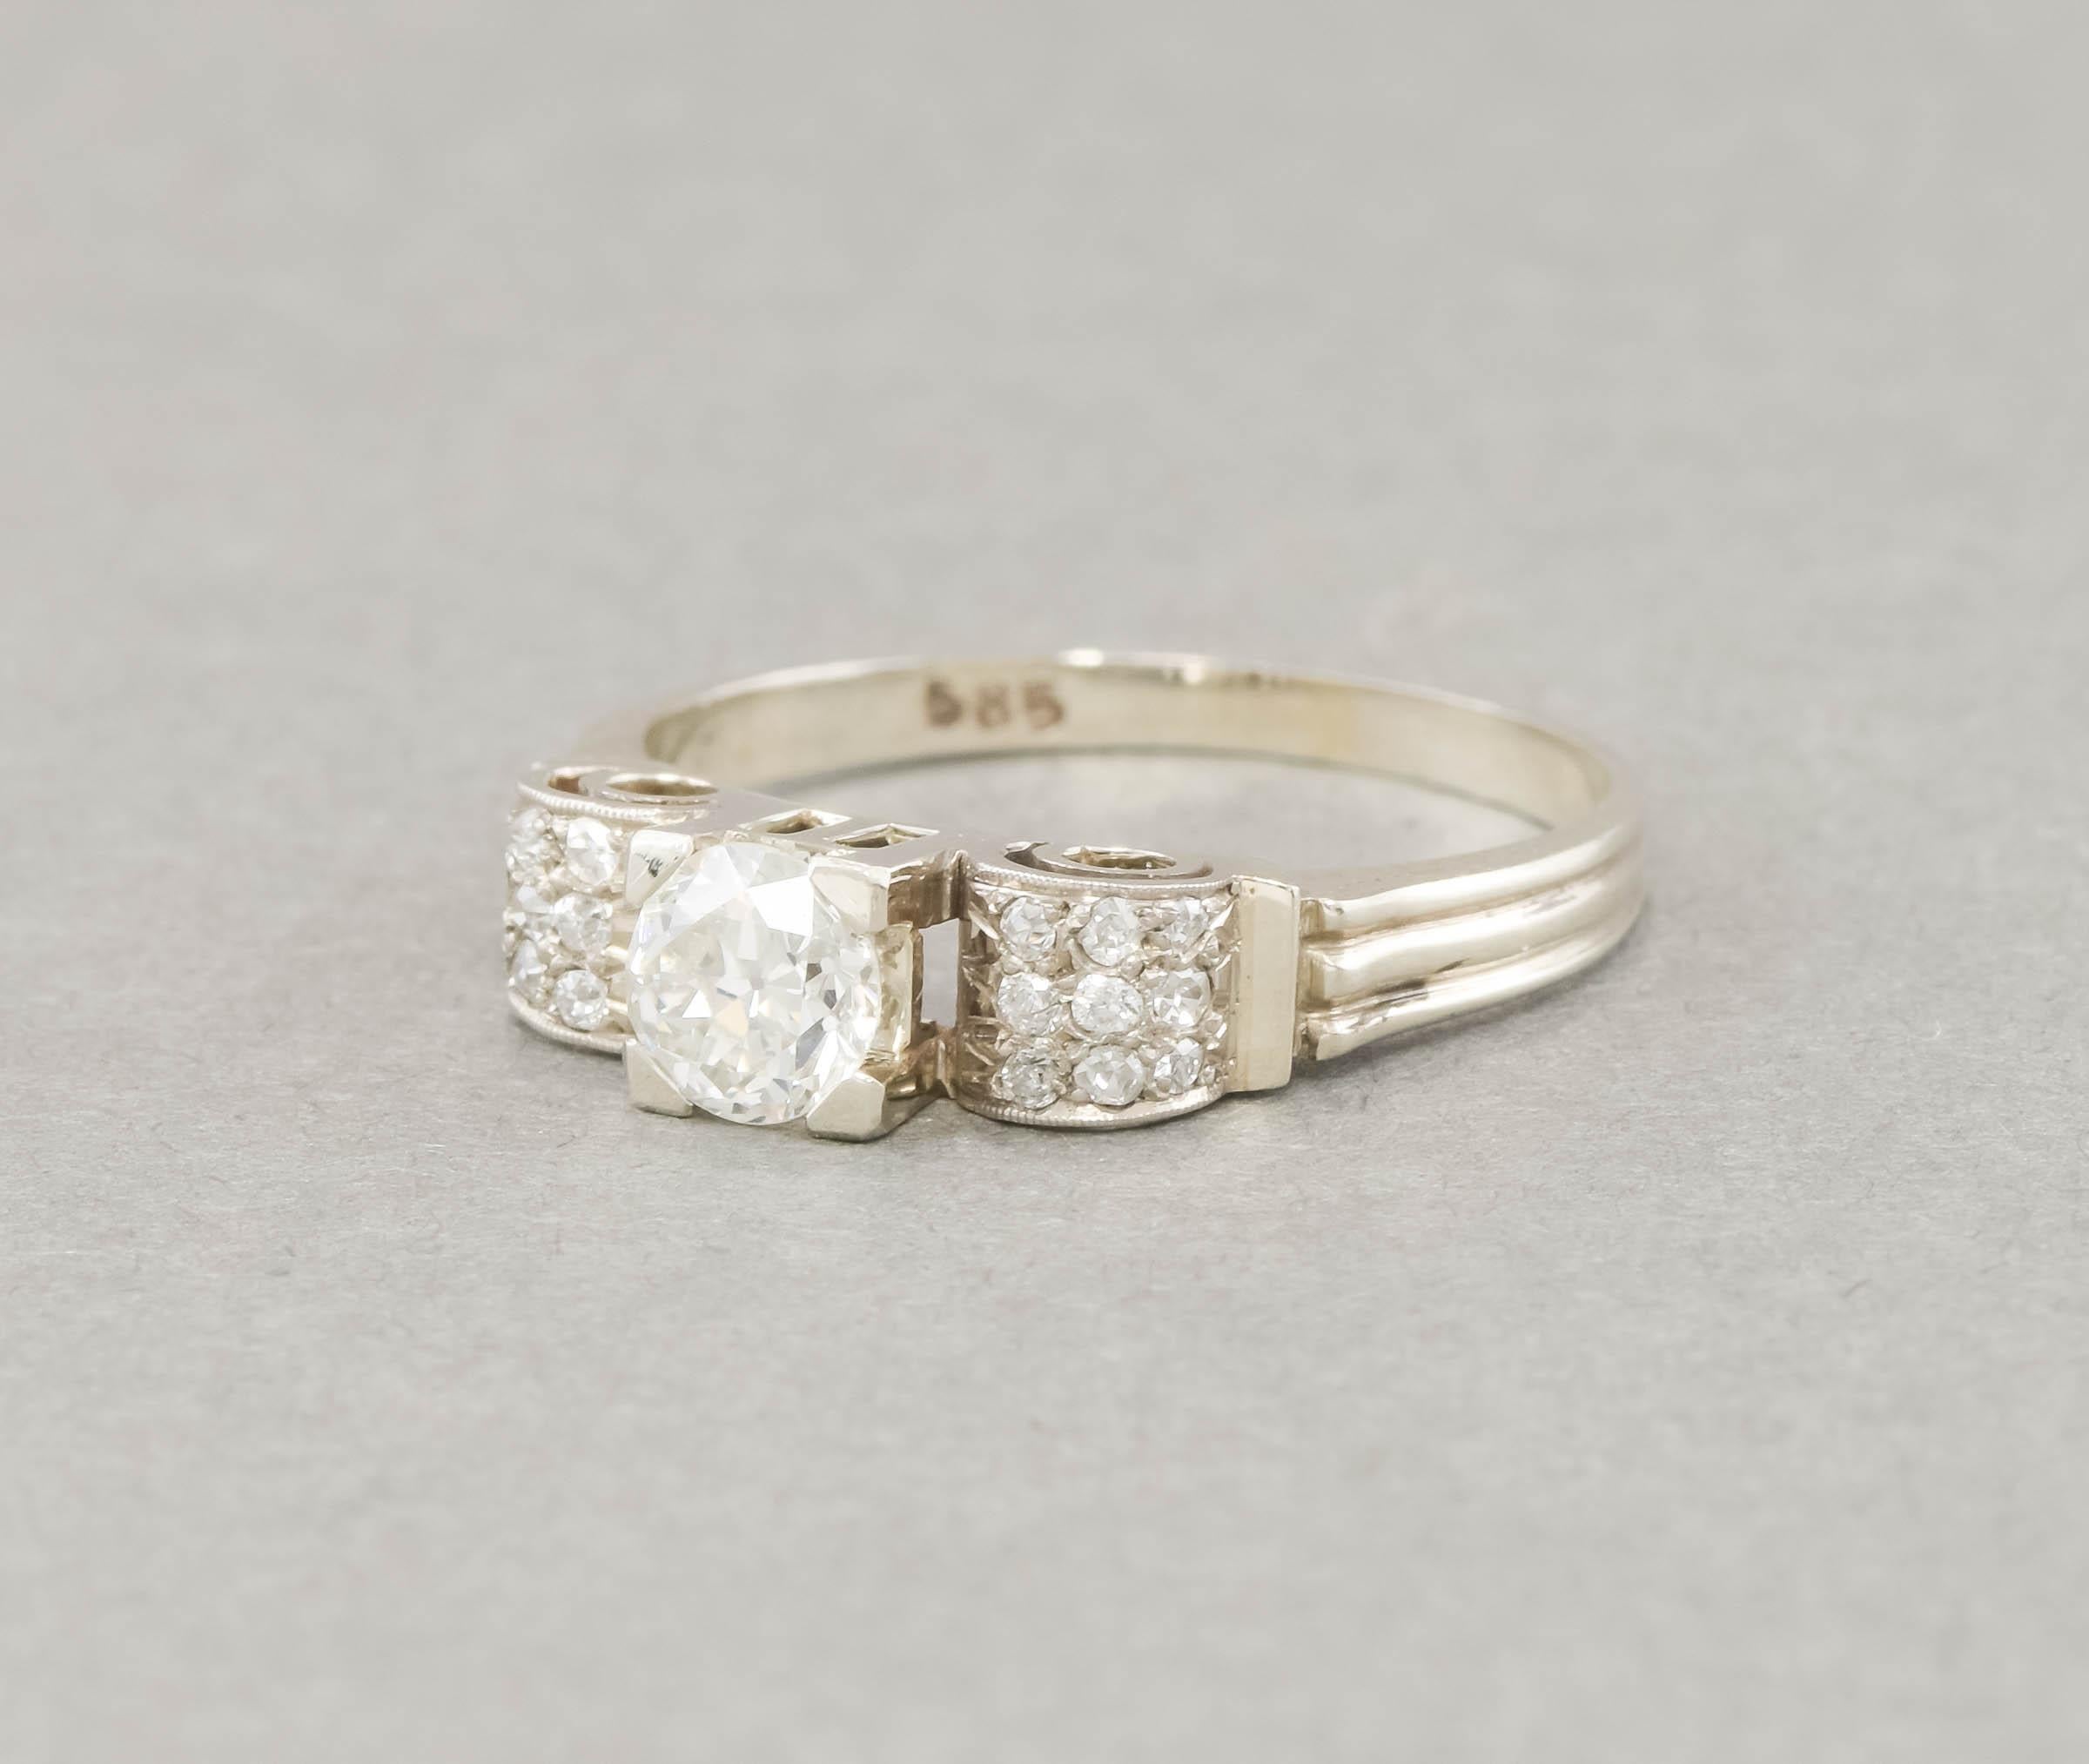 1930's Old European Cut Diamond Engagement Ring in White Gold In Good Condition For Sale In Danvers, MA